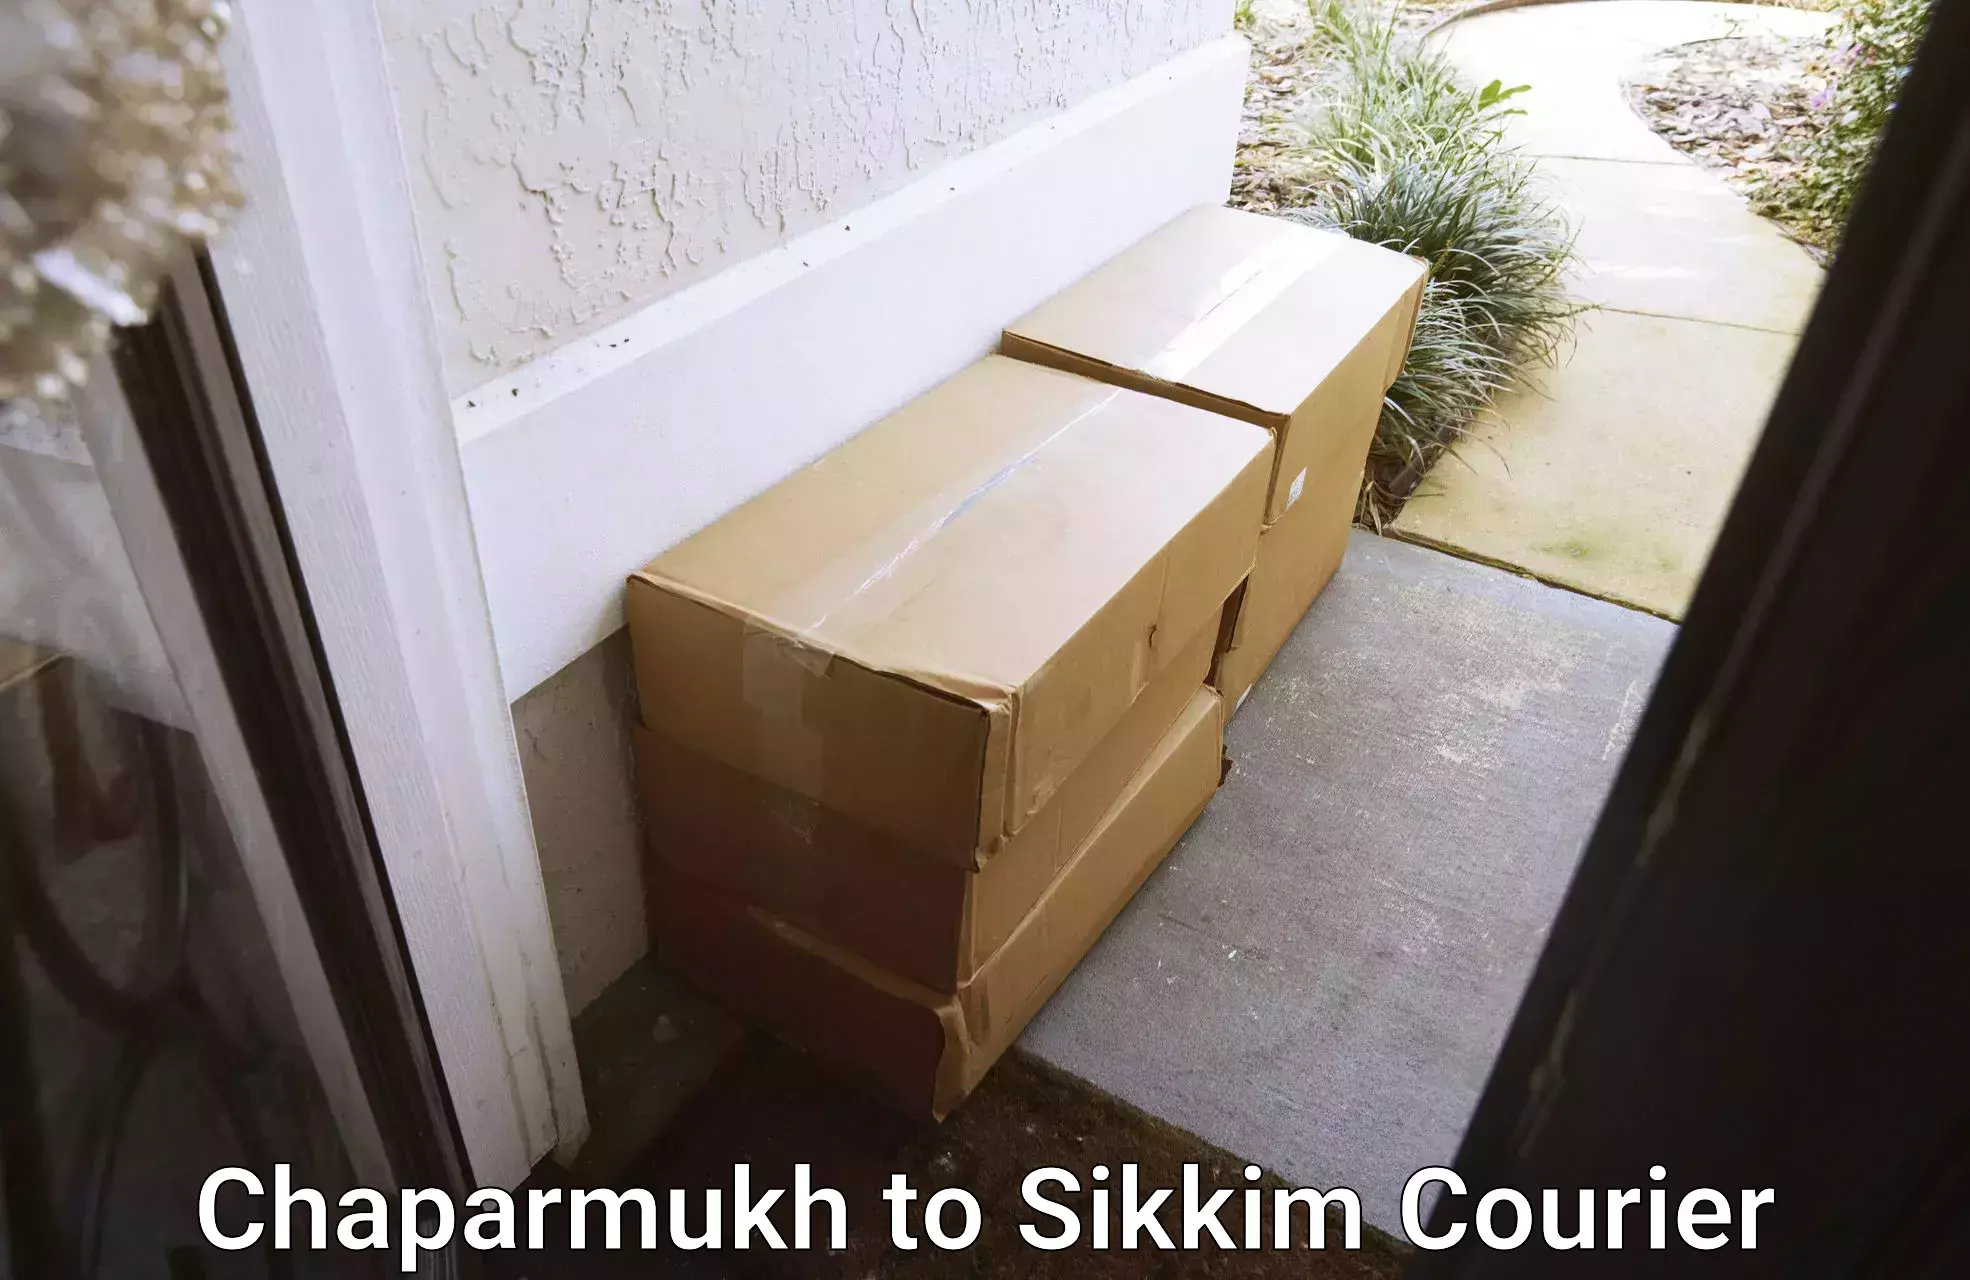 Courier membership Chaparmukh to Sikkim